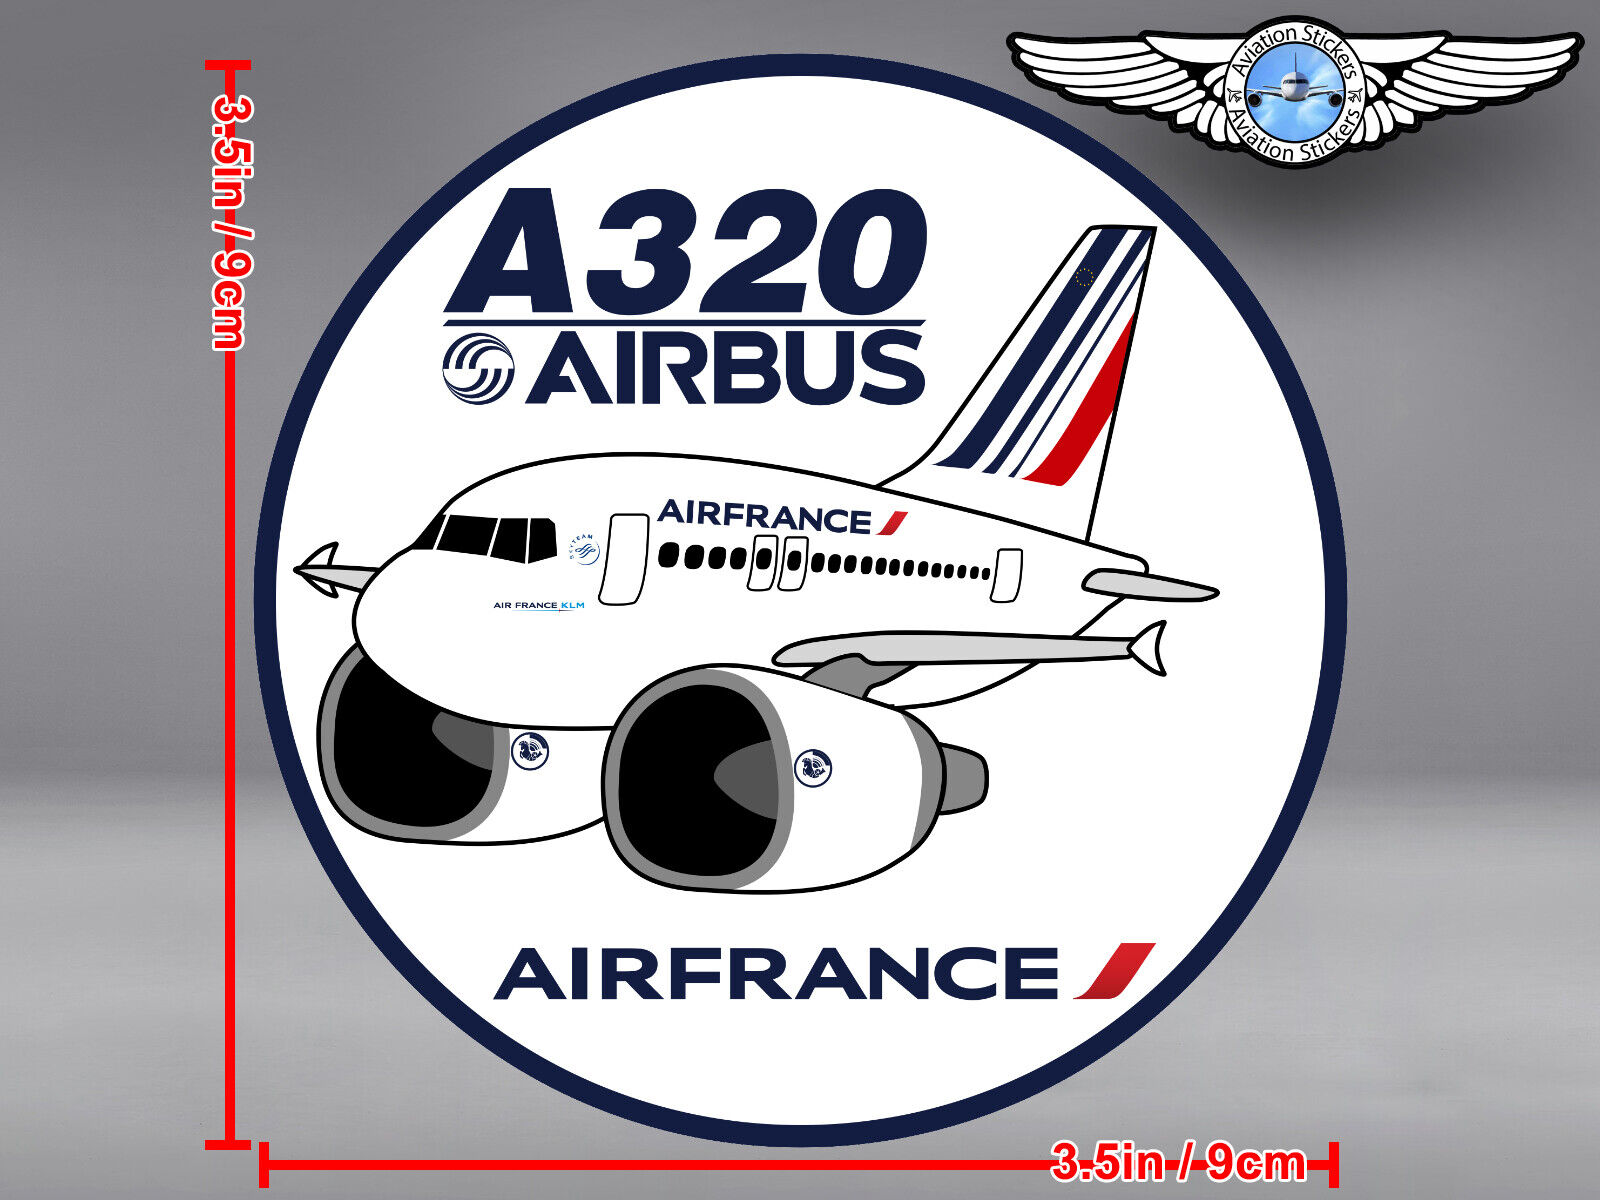 AIR FRANCE PUDGY AIRBUS A320 ROUND DECAL / STICKER